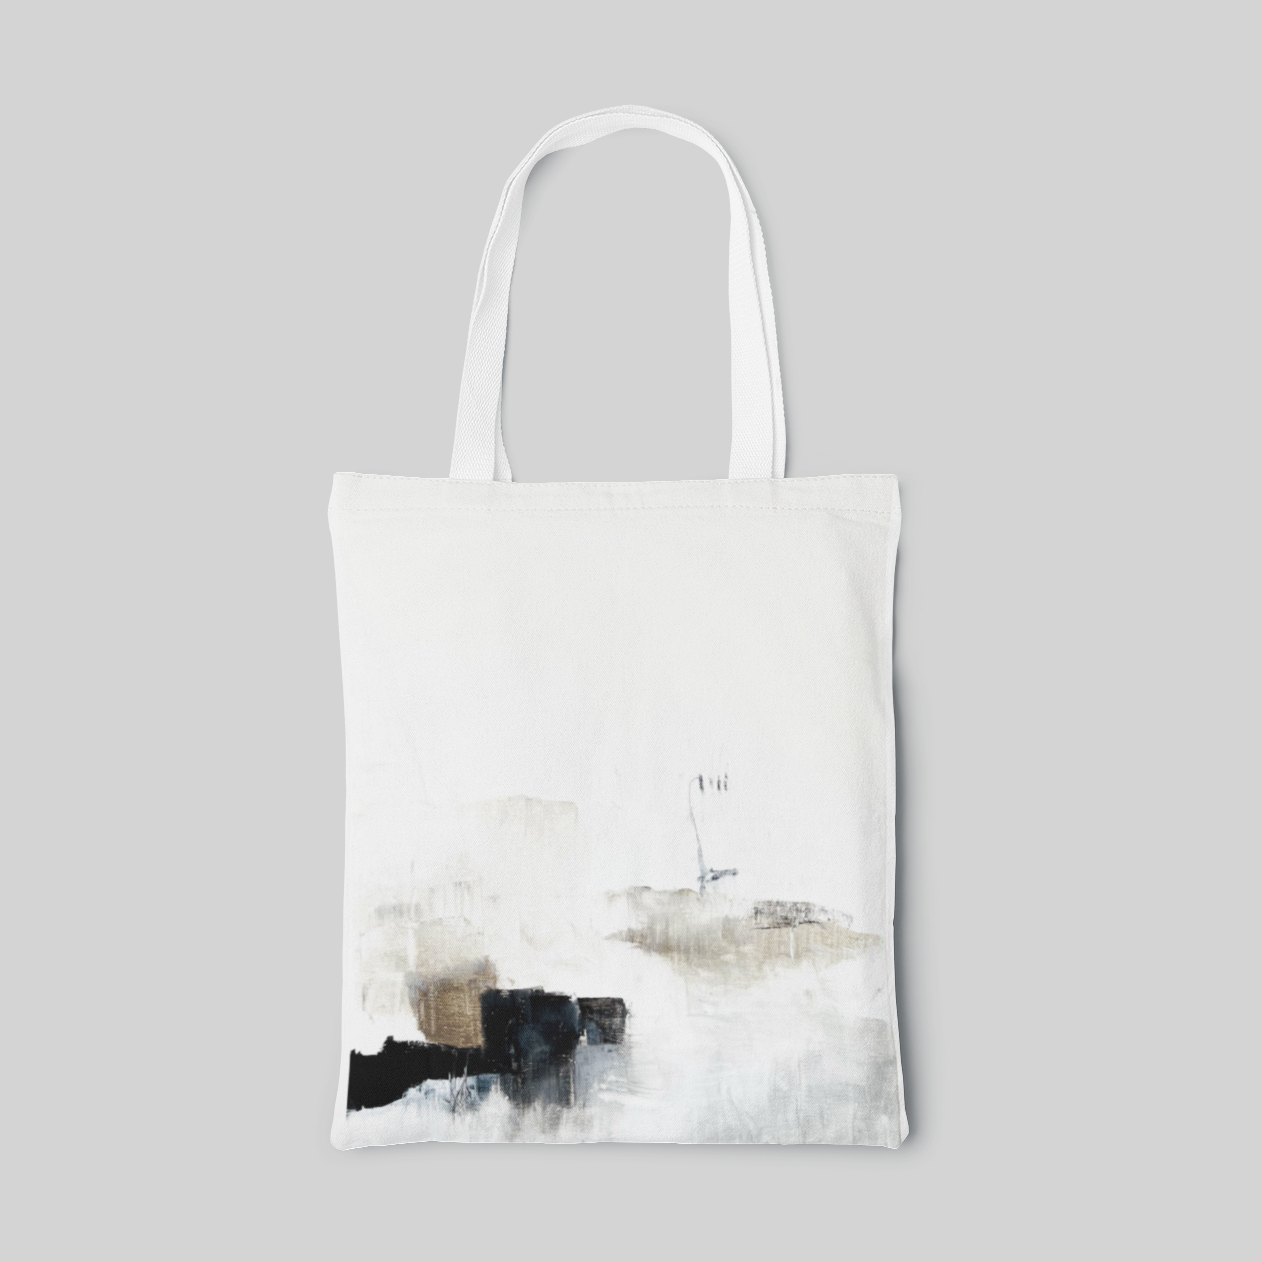 Summer at the fields tote bag